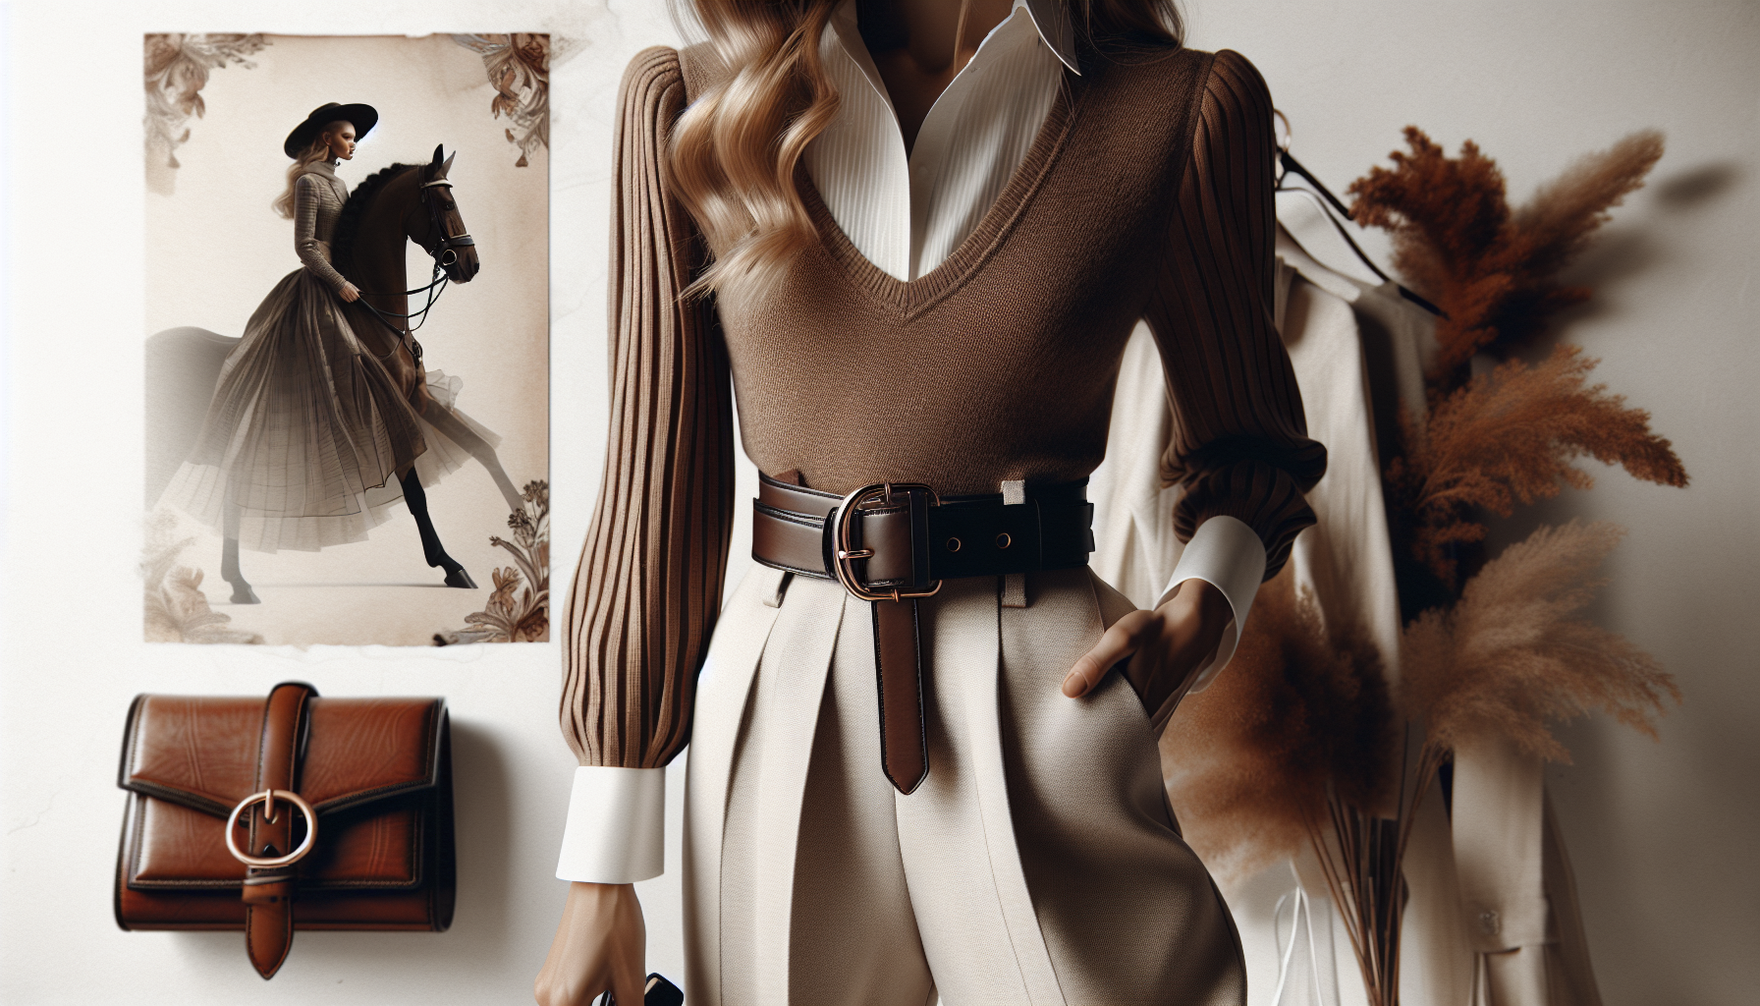 A fashionable scene detailing the use of equestrian belts to style an outfit for a chic finish. The image focuses on an outfit in autumn tones, styled with a sleek, broad, leather equestrian belt of a